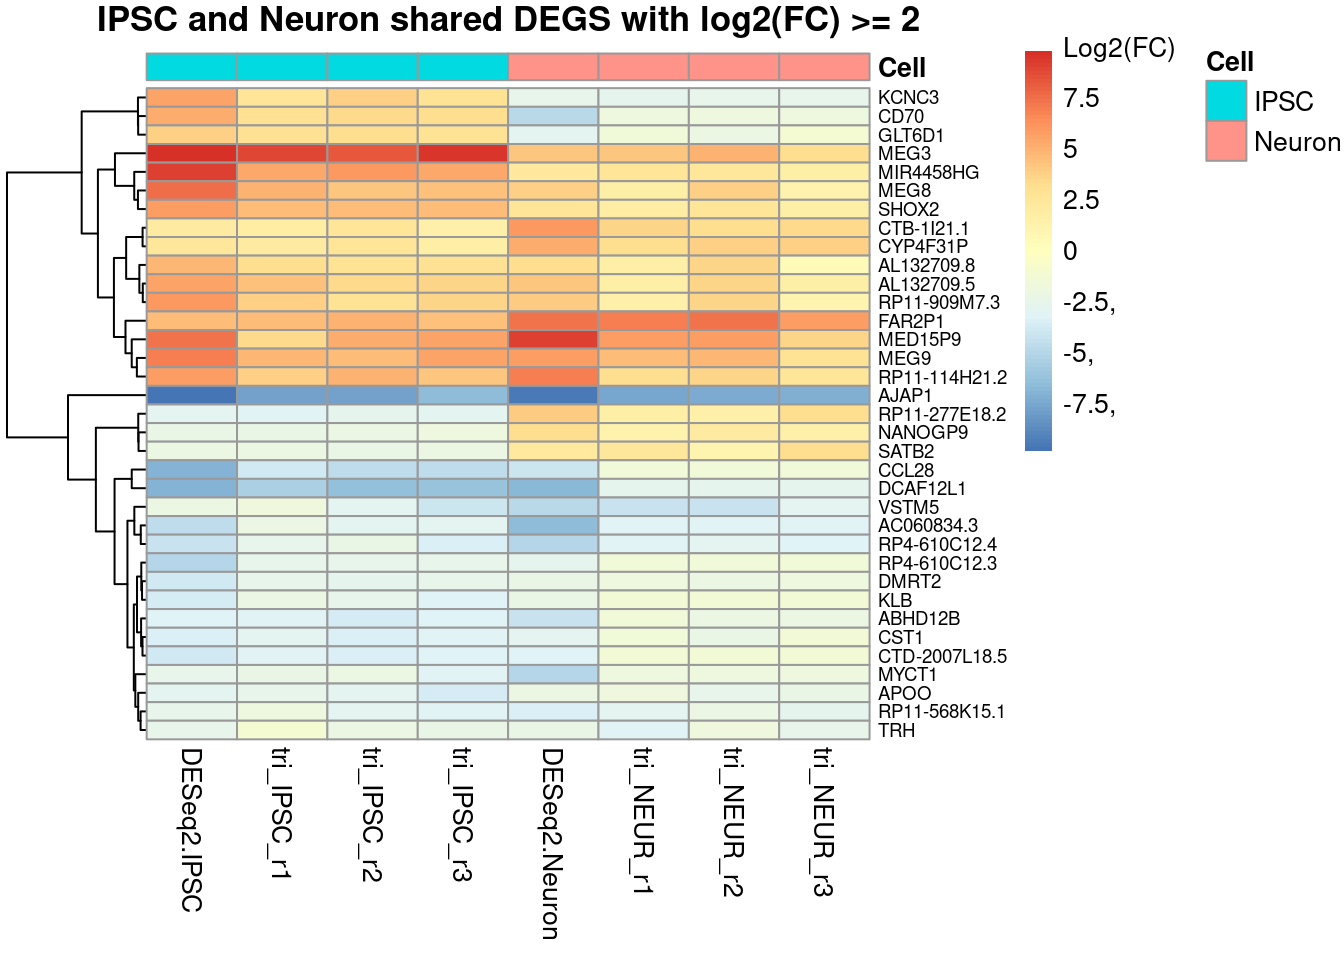 Heatmap showing the fold changes of the Trisomic vs Disomic comparisons for both cell types. The shown genes are all shared DEGS (the 96 shown in the Venn-diagrams) but also filtered for an absolute log2(FC) value of >2.